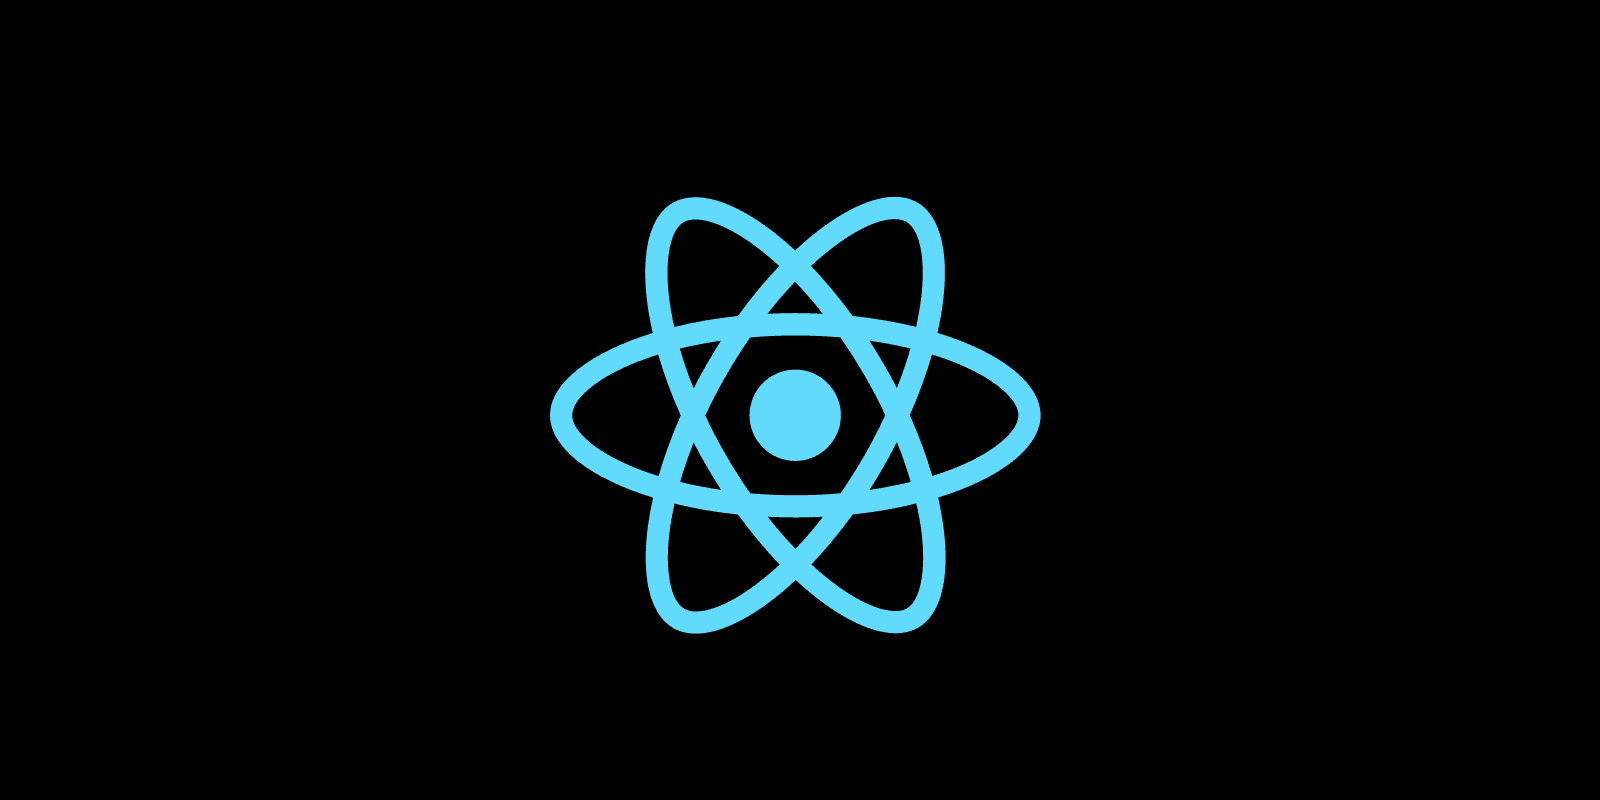 How to use the React useState Hook